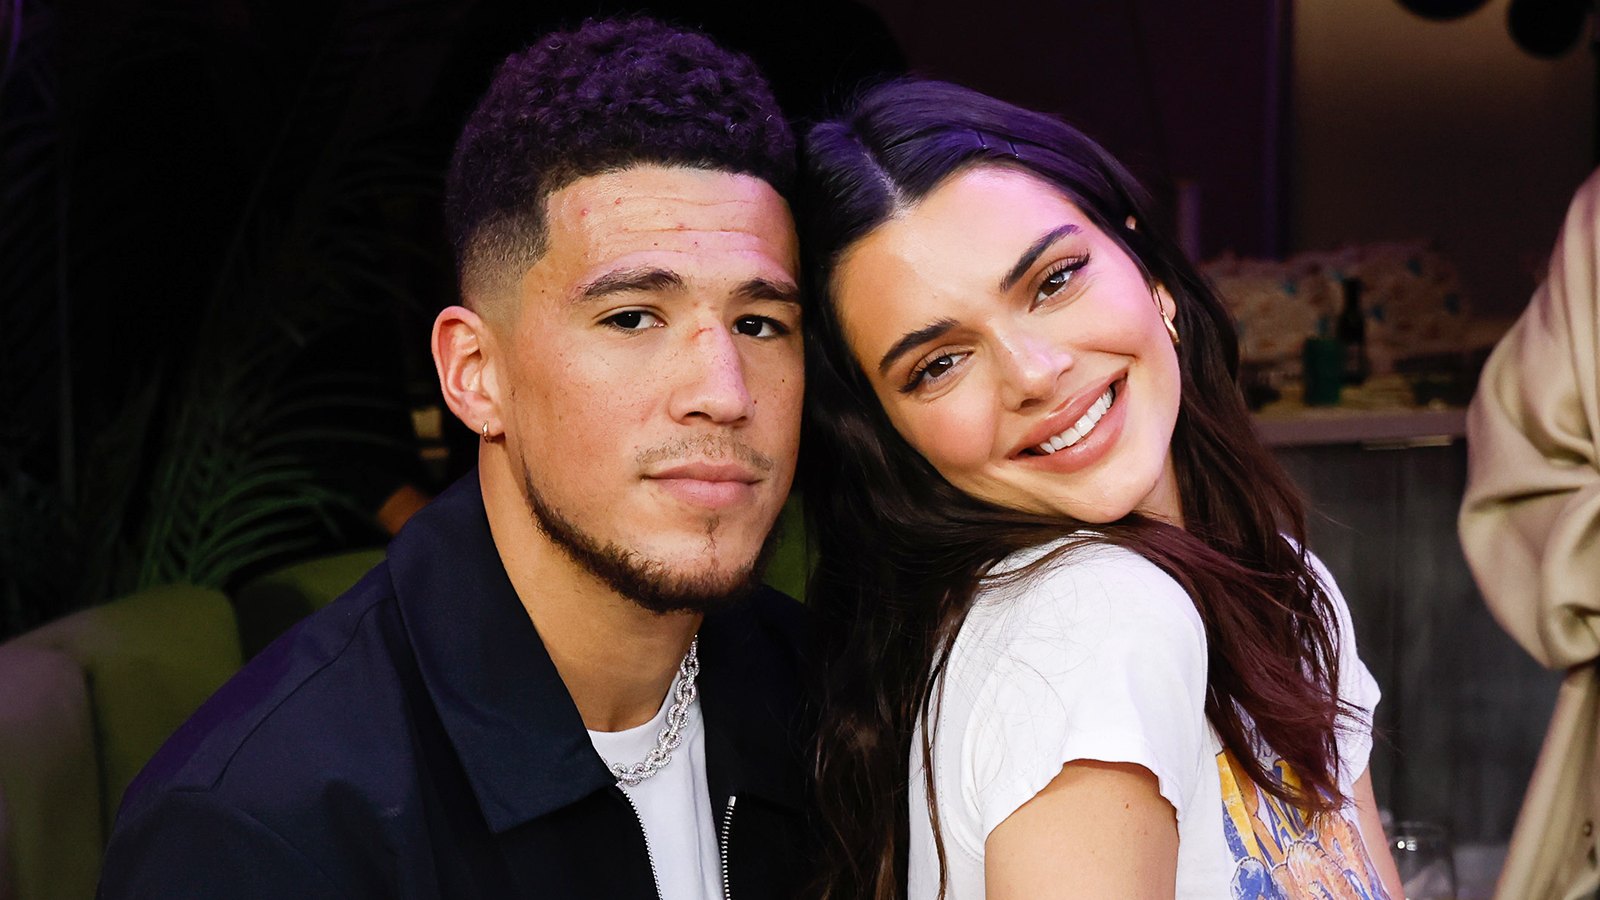 Kendall Jenner and Boyfriend Devin Booker Have Low-Key Date Night Playing 'Sorry' Together